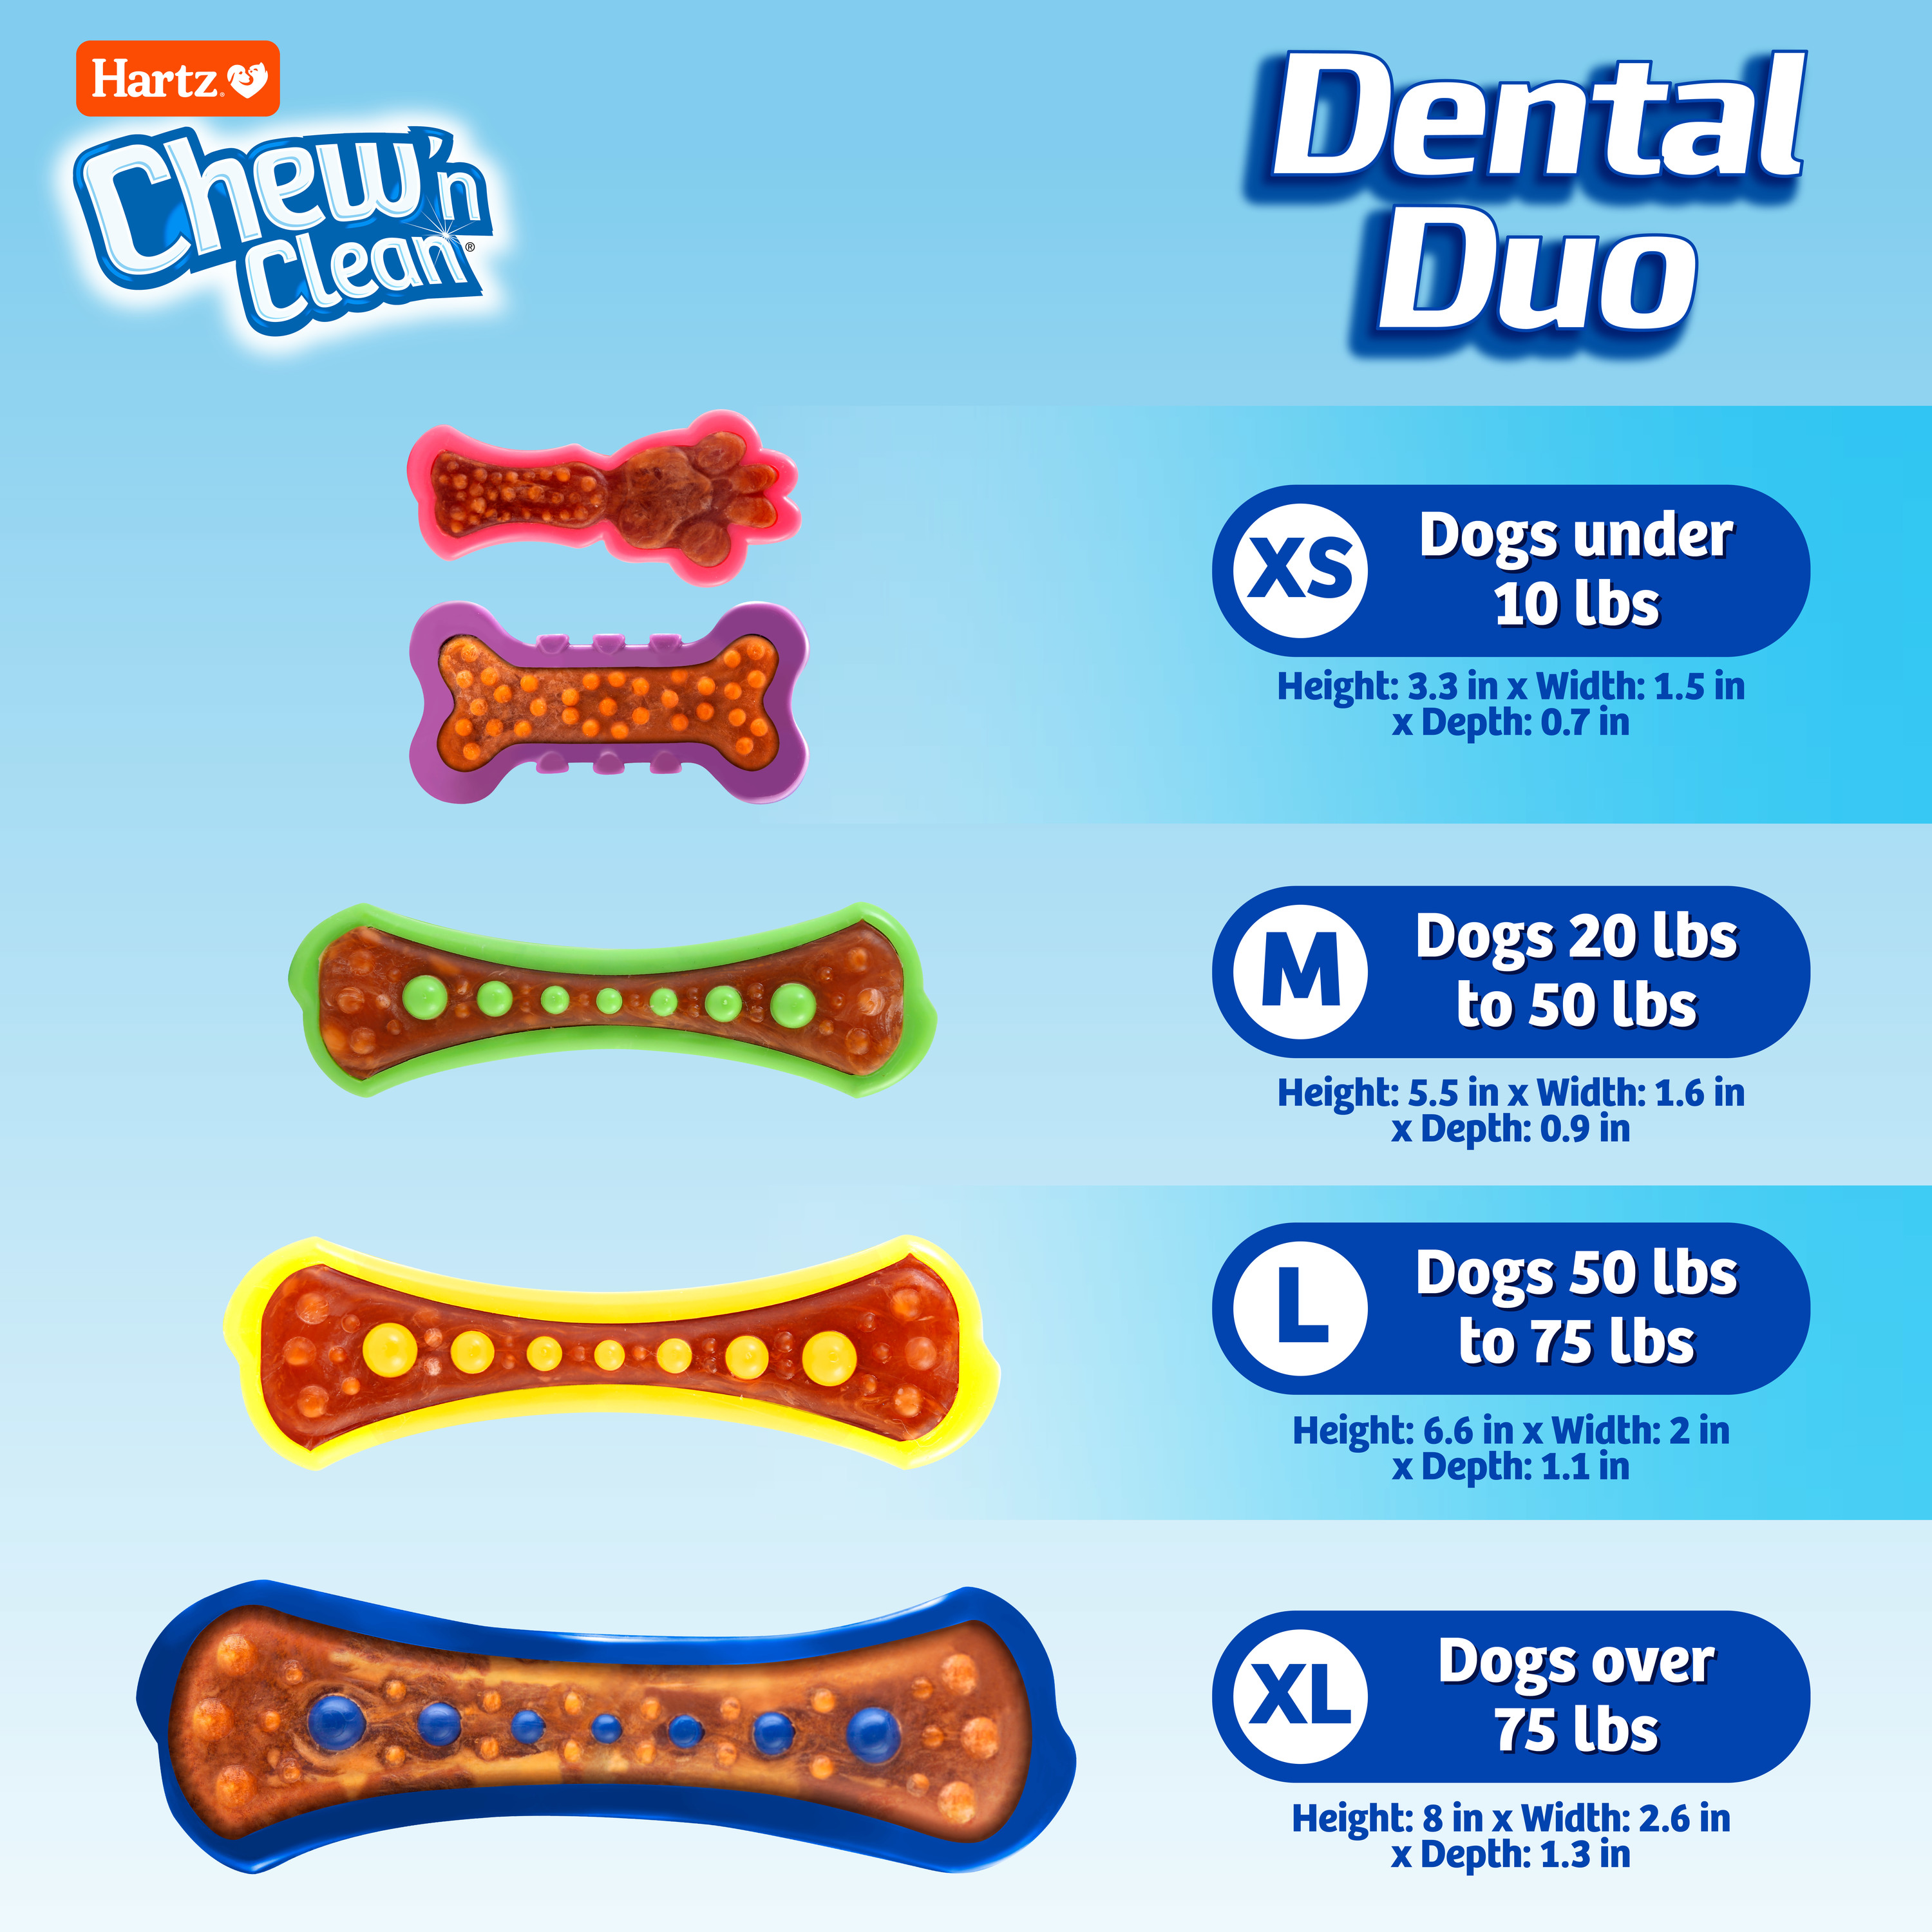 Hartz Chew 'n Clean Dental Duo Dog Toy, Medium, Color May Vary - image 3 of 8